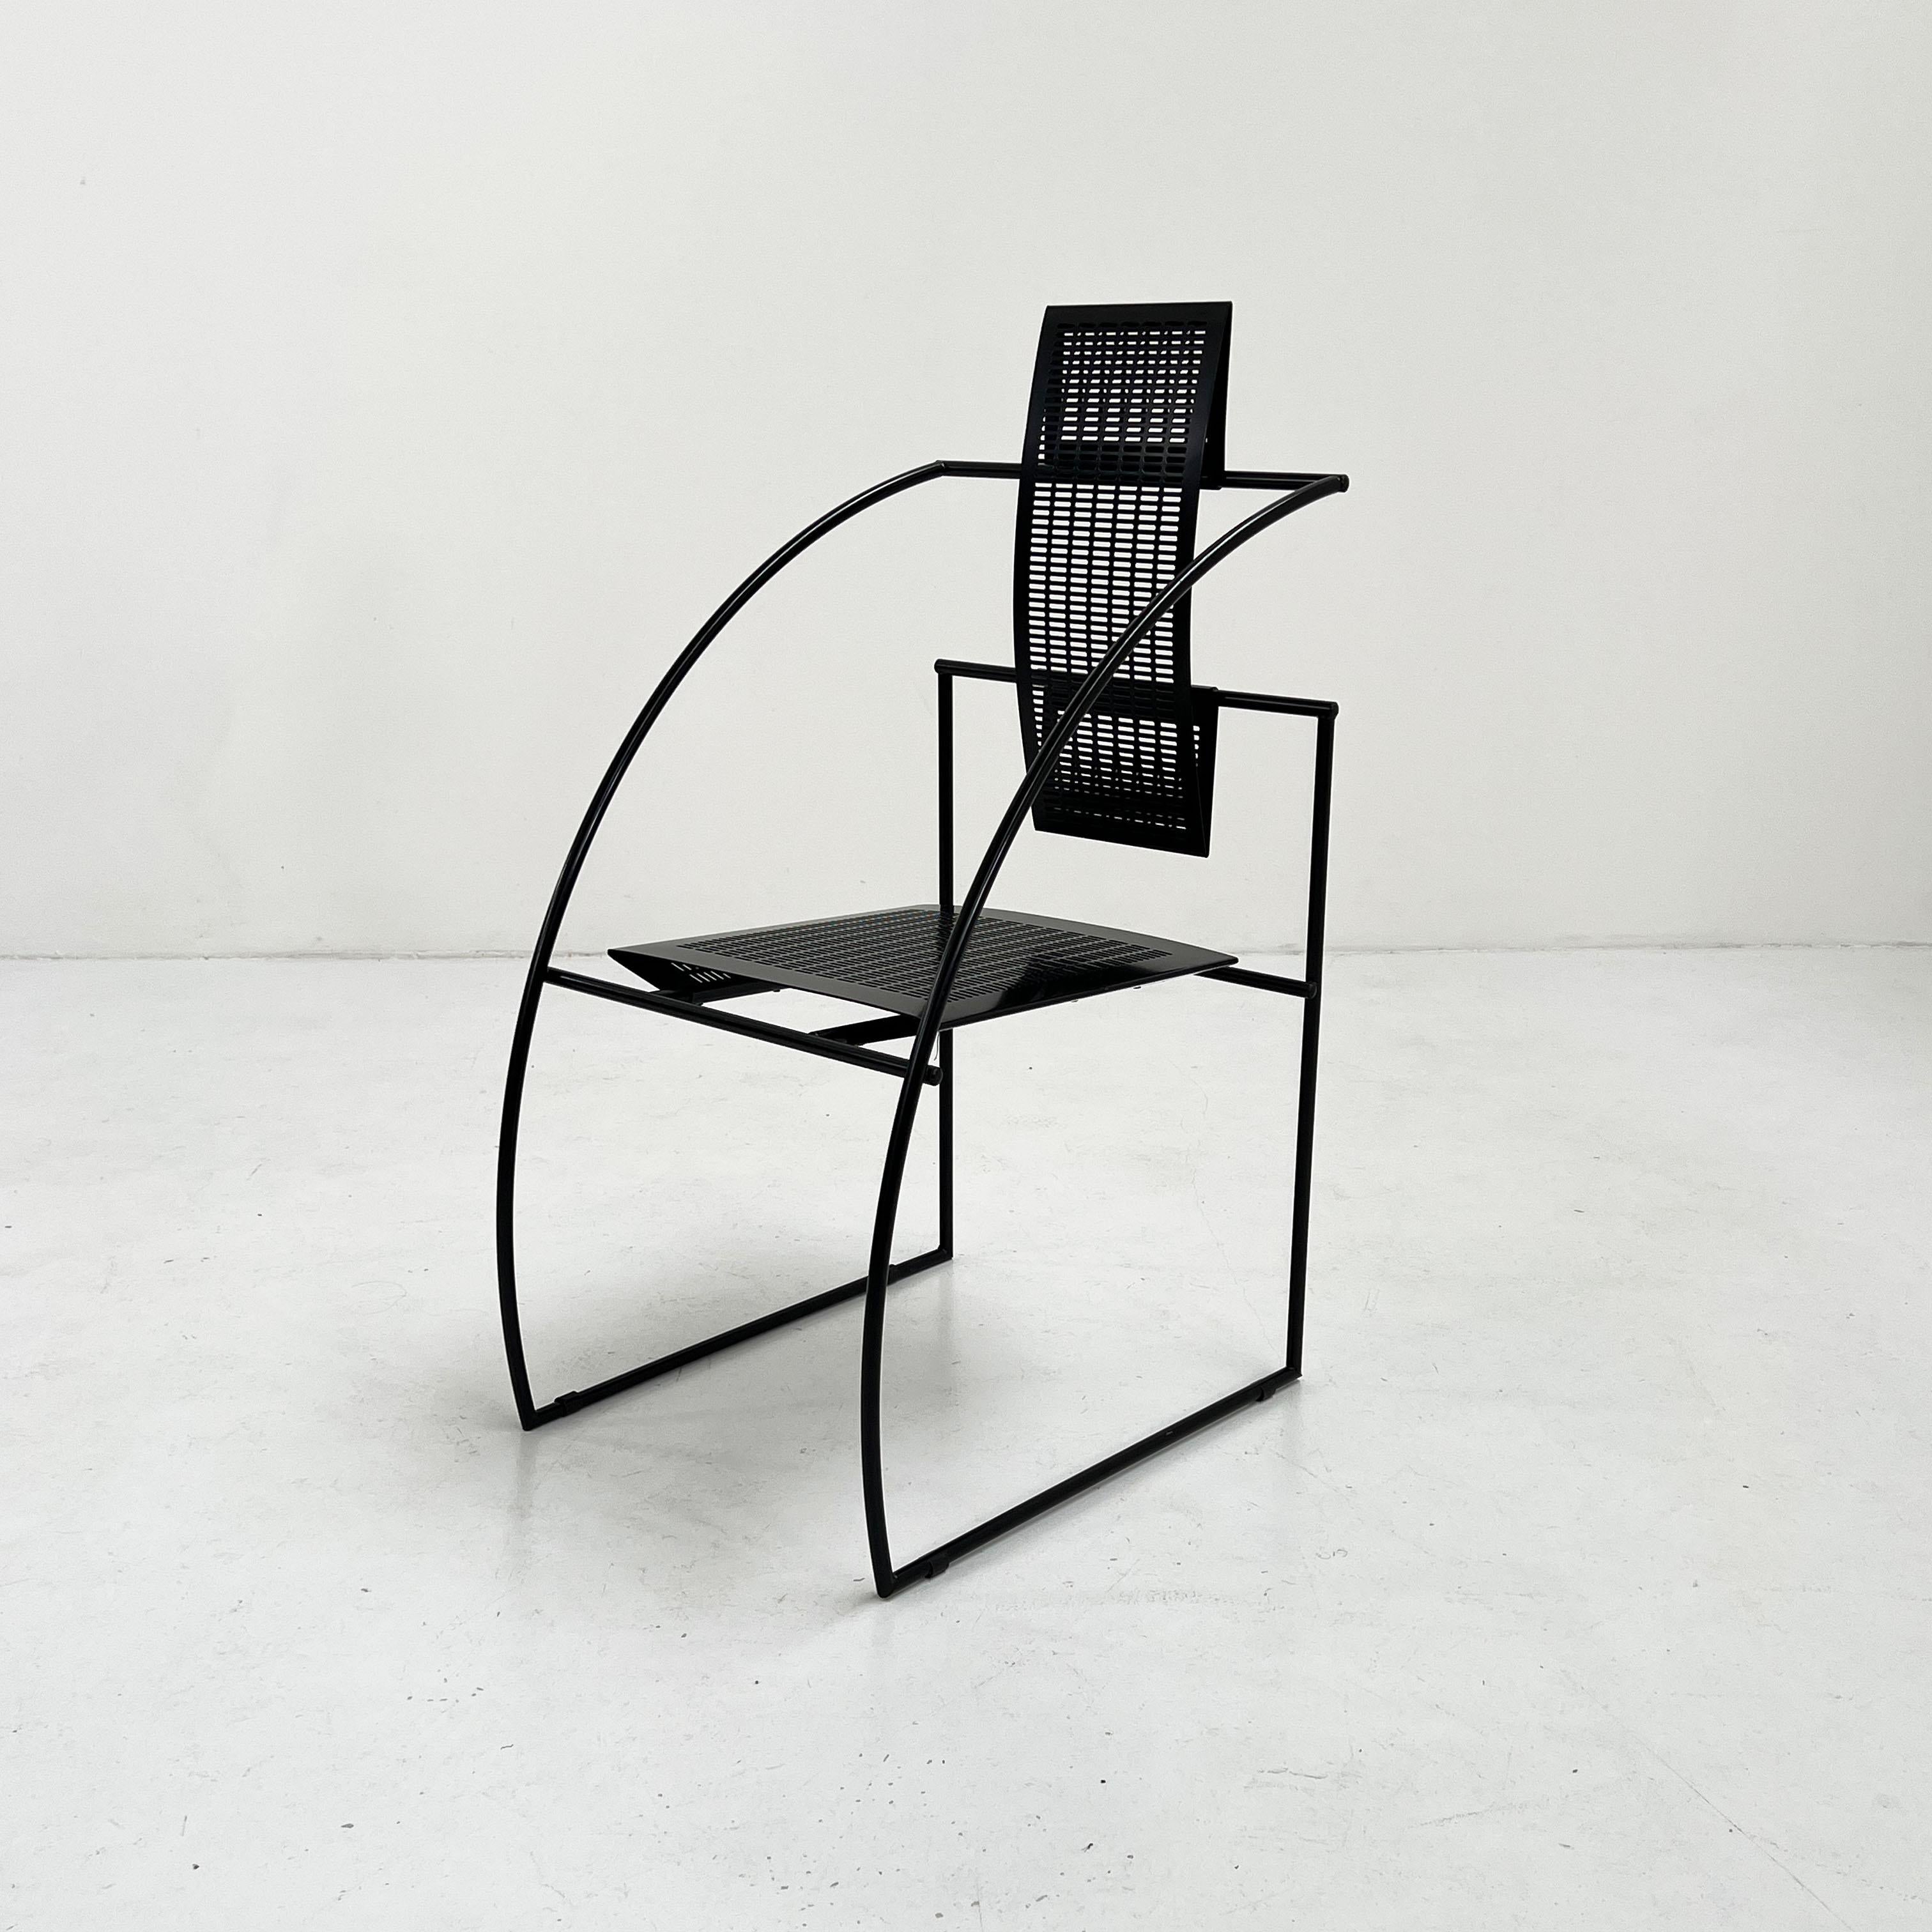 Designer - Mario Botta
Producer - Alias
Model - Quinta Chair
Design Period - Eighties
Measurements - Width 43 cm x Depth 55 cm x Height 94 cm x Seat Height 43 cm
Materials - Metal
Color - Black
Comments - Light wear consistent with age and use. 